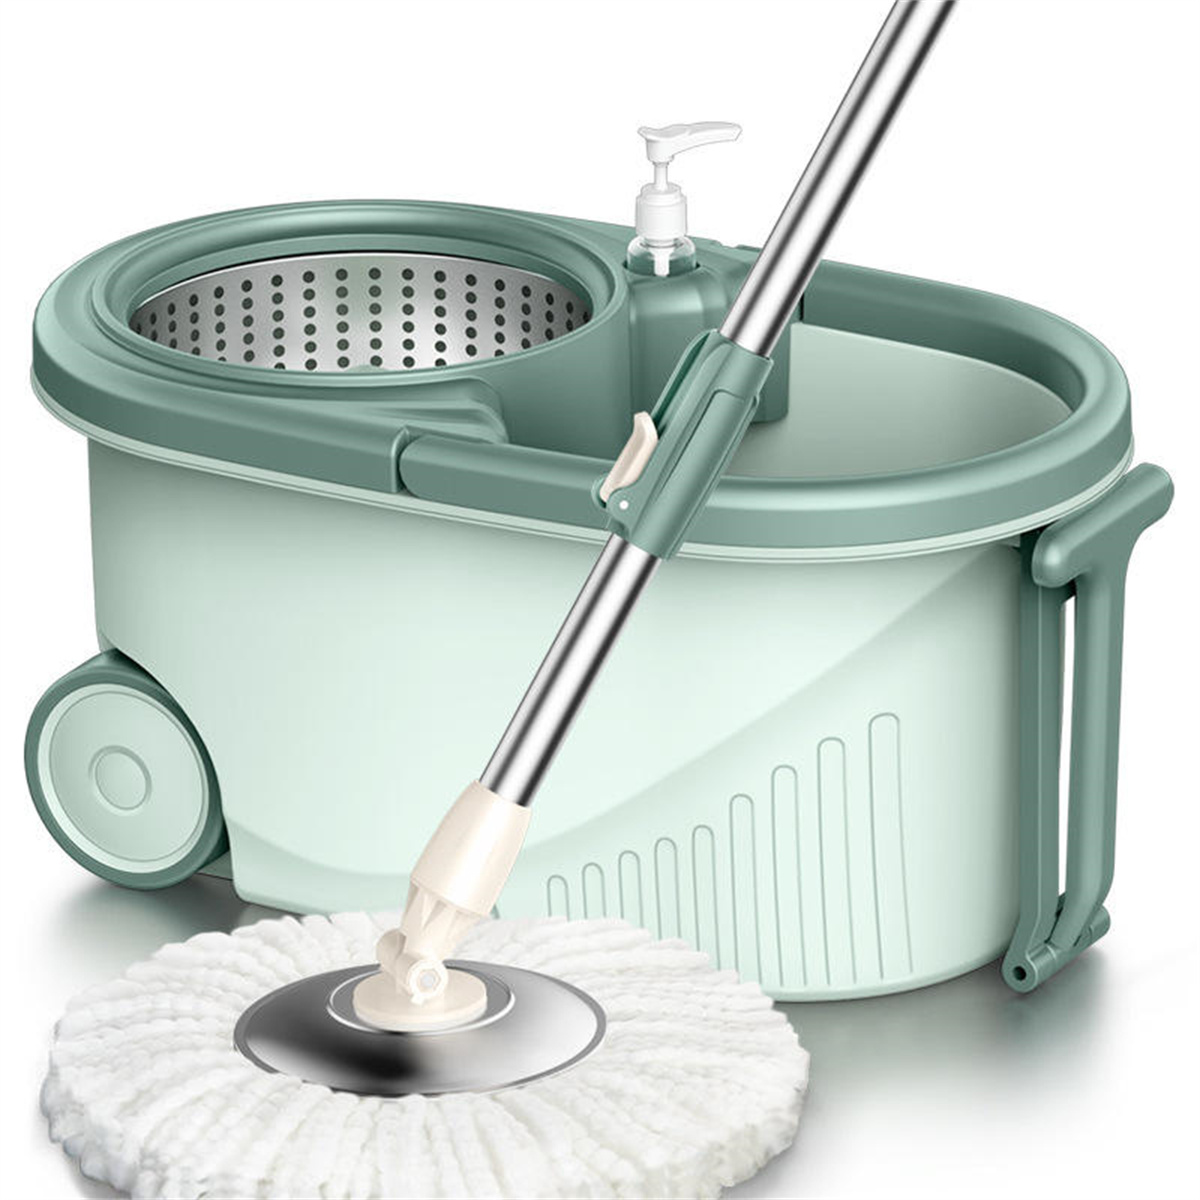 SNL-L-3 Spin Mop and Bucket, 360 Mop and Bucket with Wringer Set Stainless Steel Floor Spin Mop Bucket System for Floor Cleaning